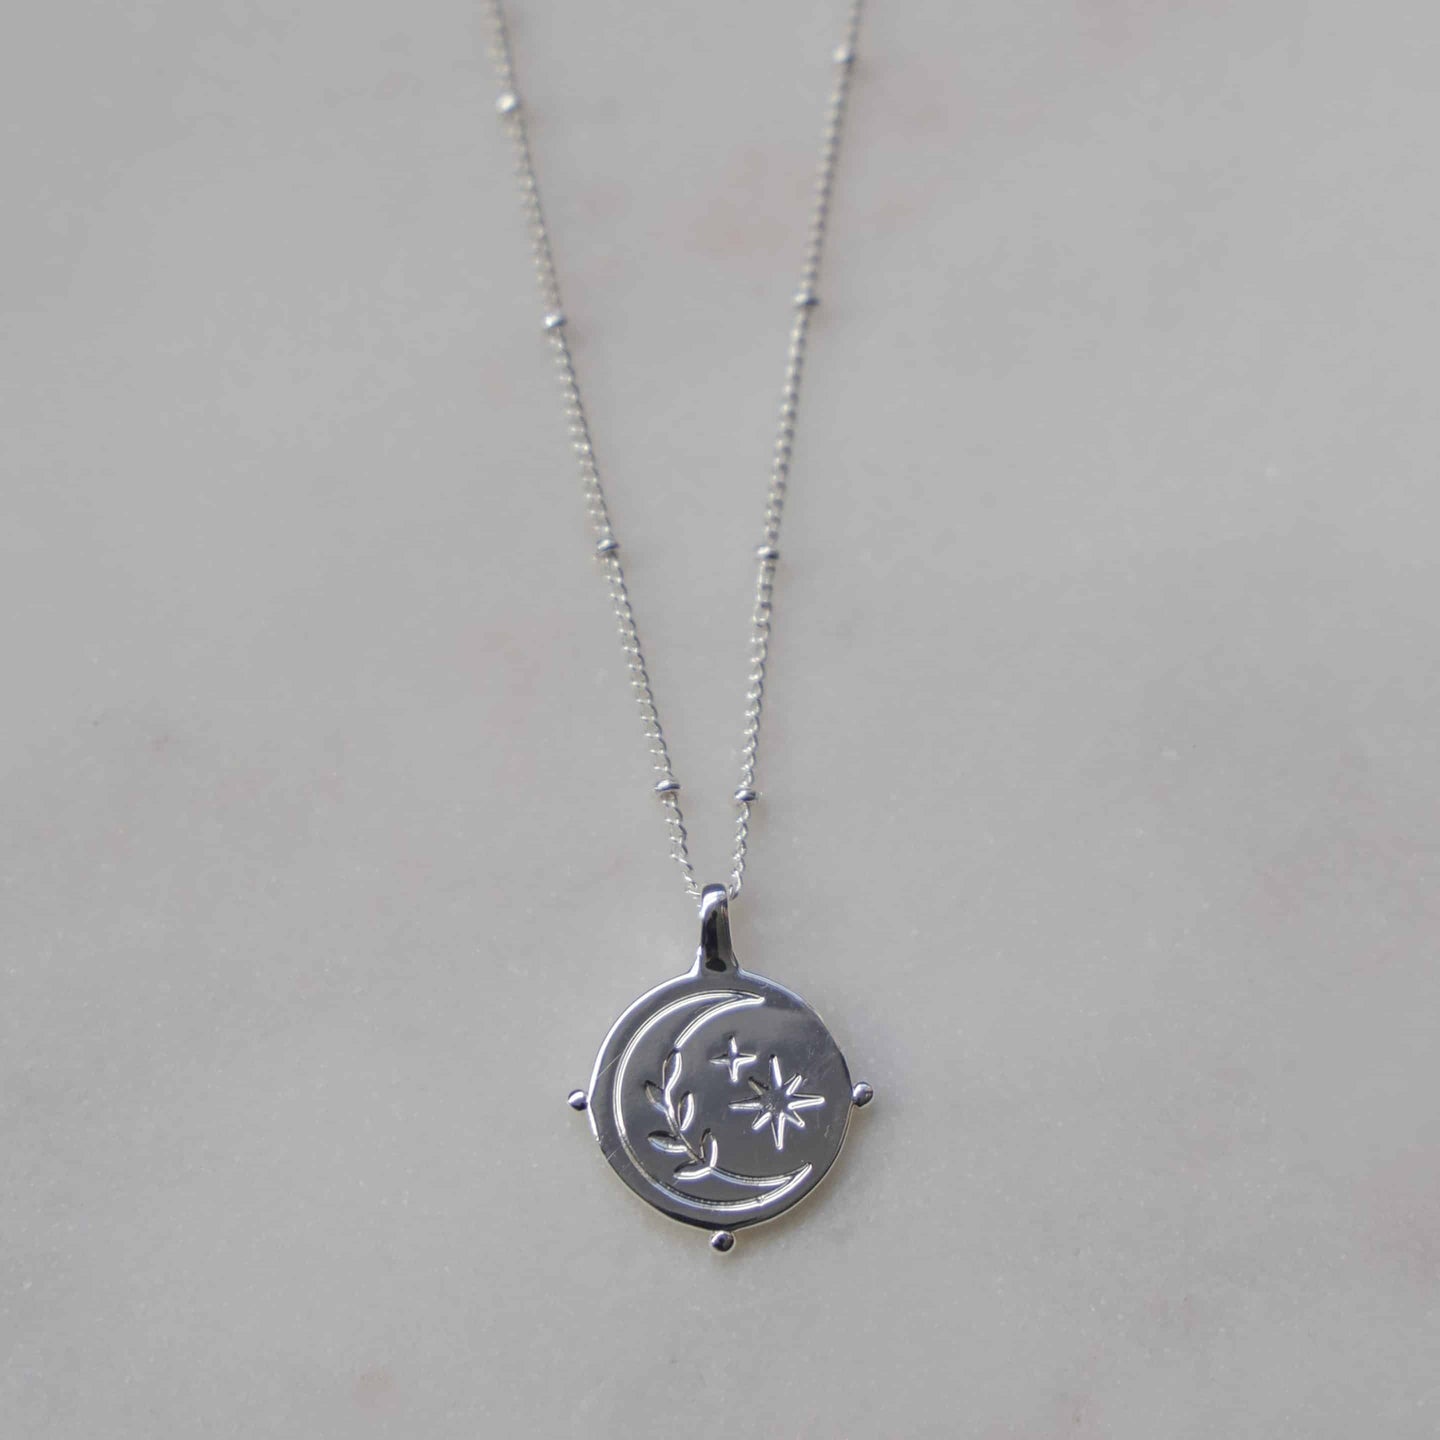 Ethereal Necklace - Silver